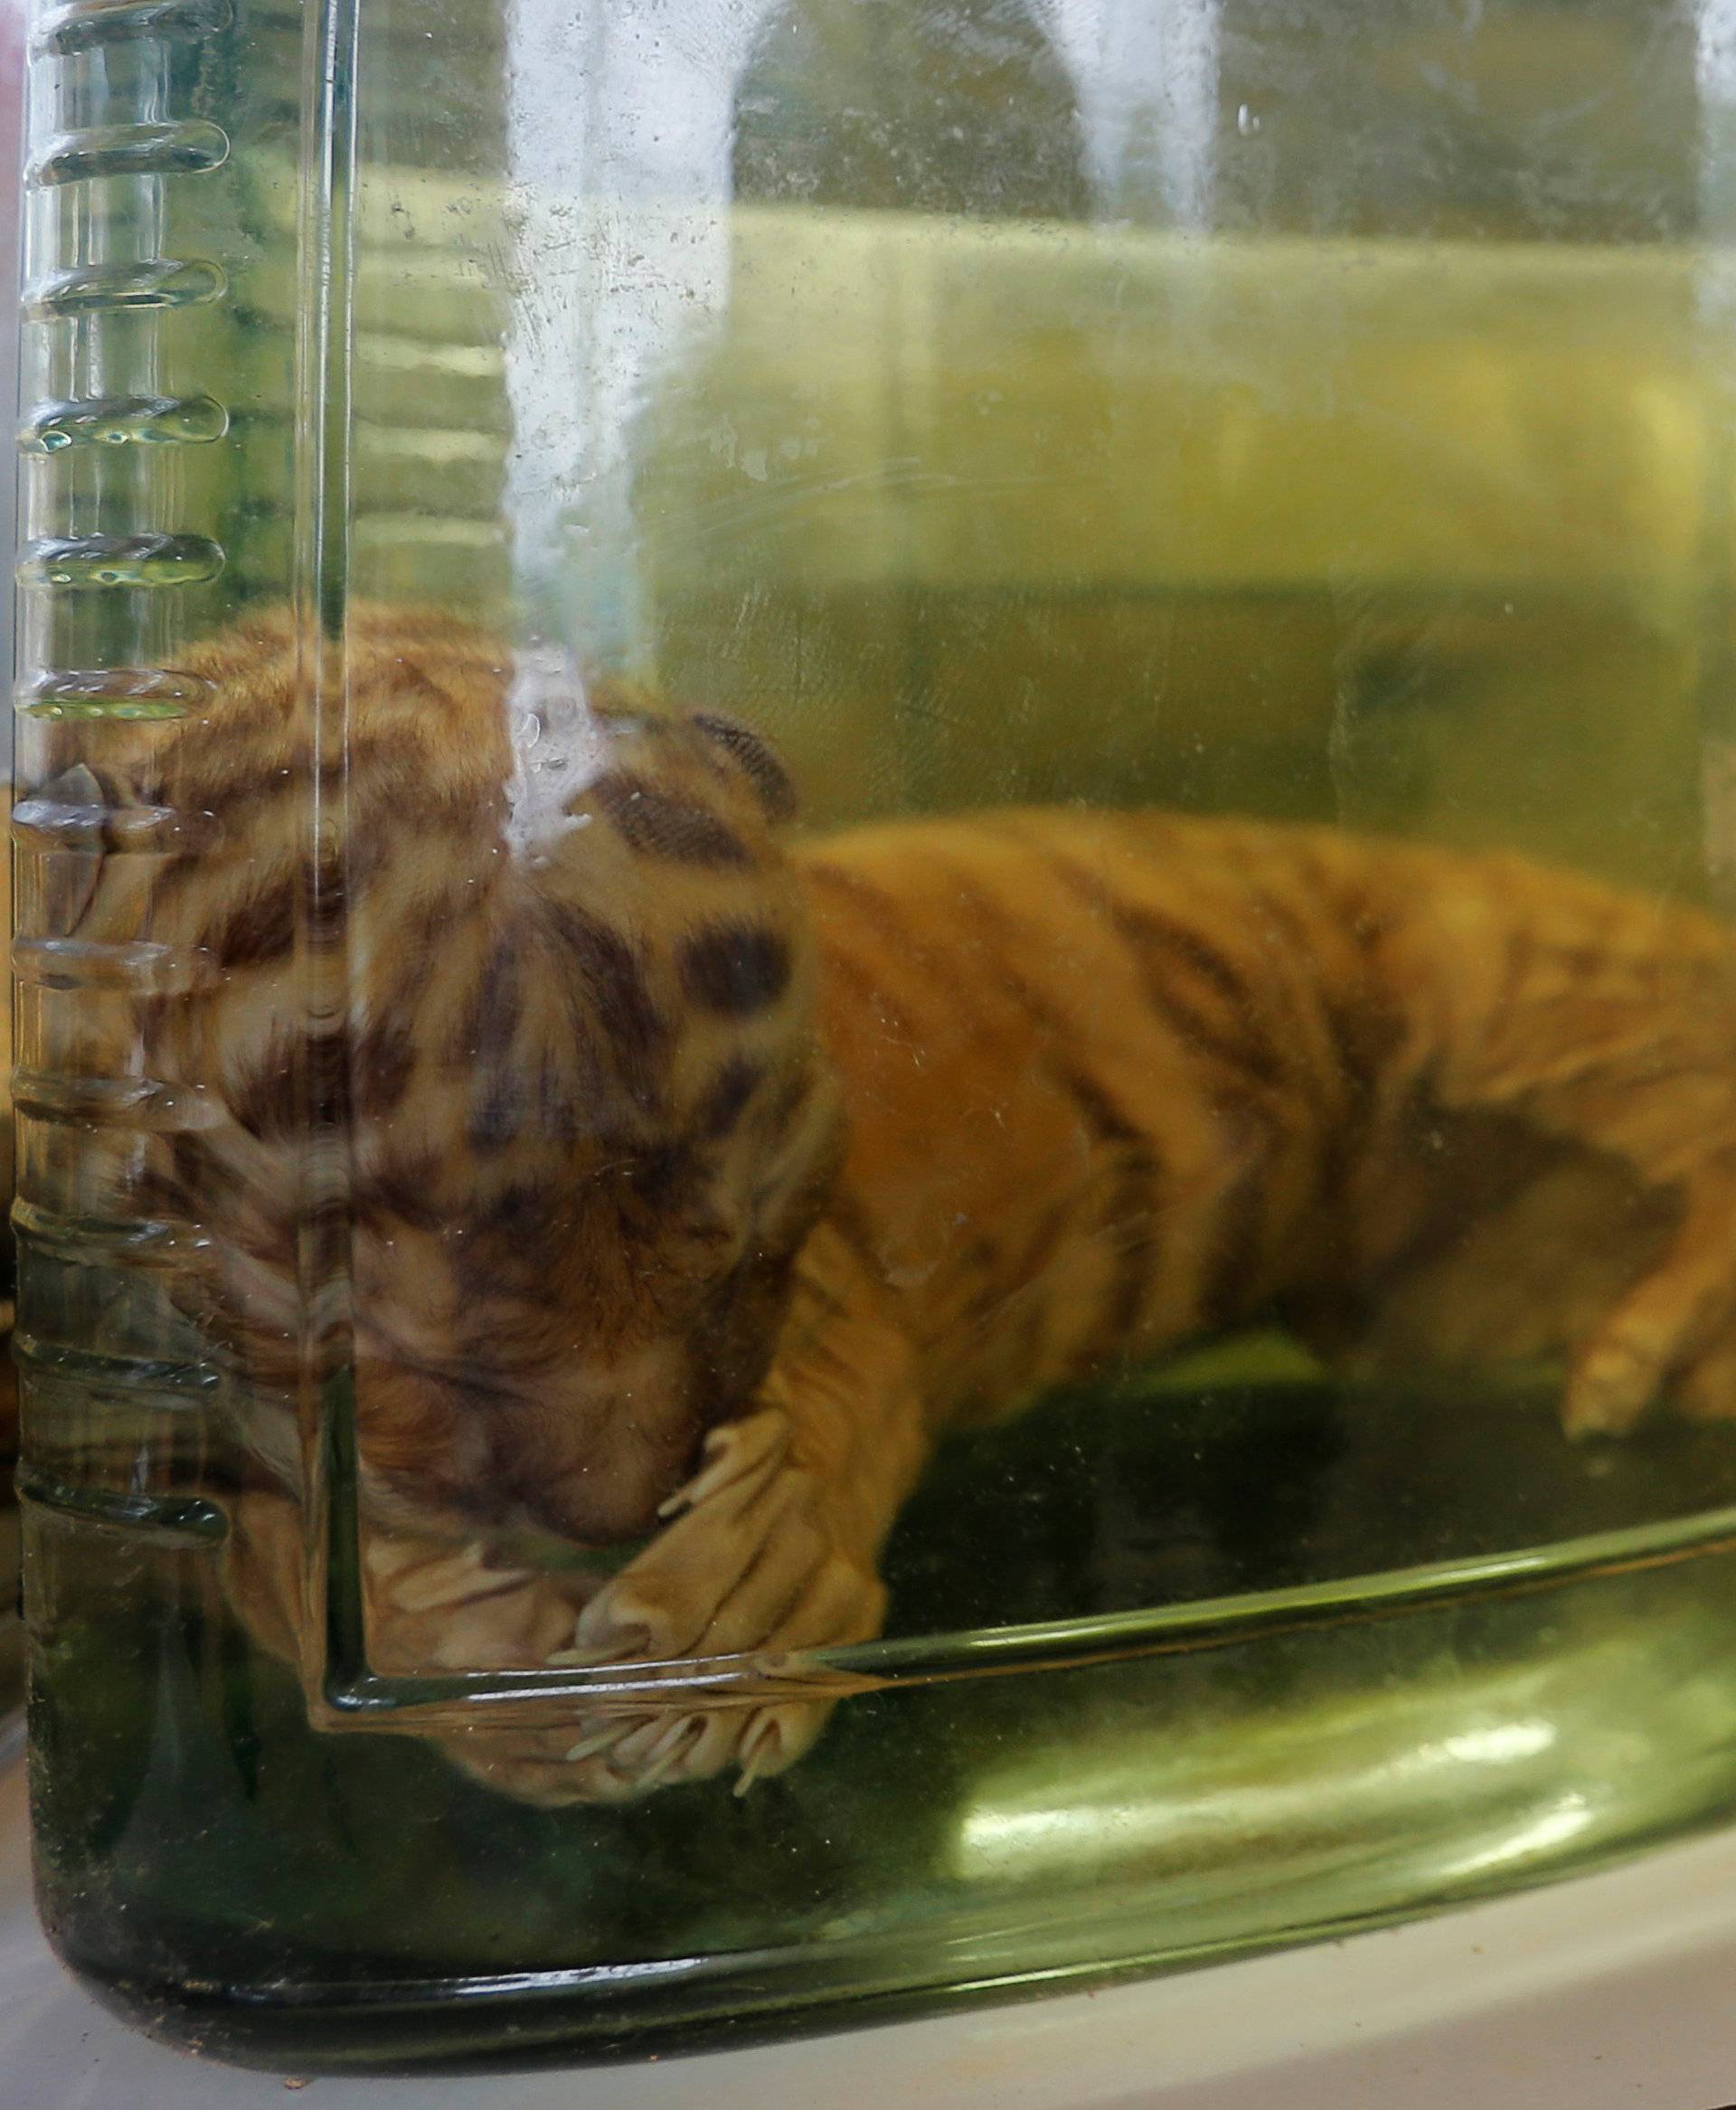 Tiger cub carcasses are seen in jars containing liquid as officials continue moving live tigers from the controversial Tiger Temple